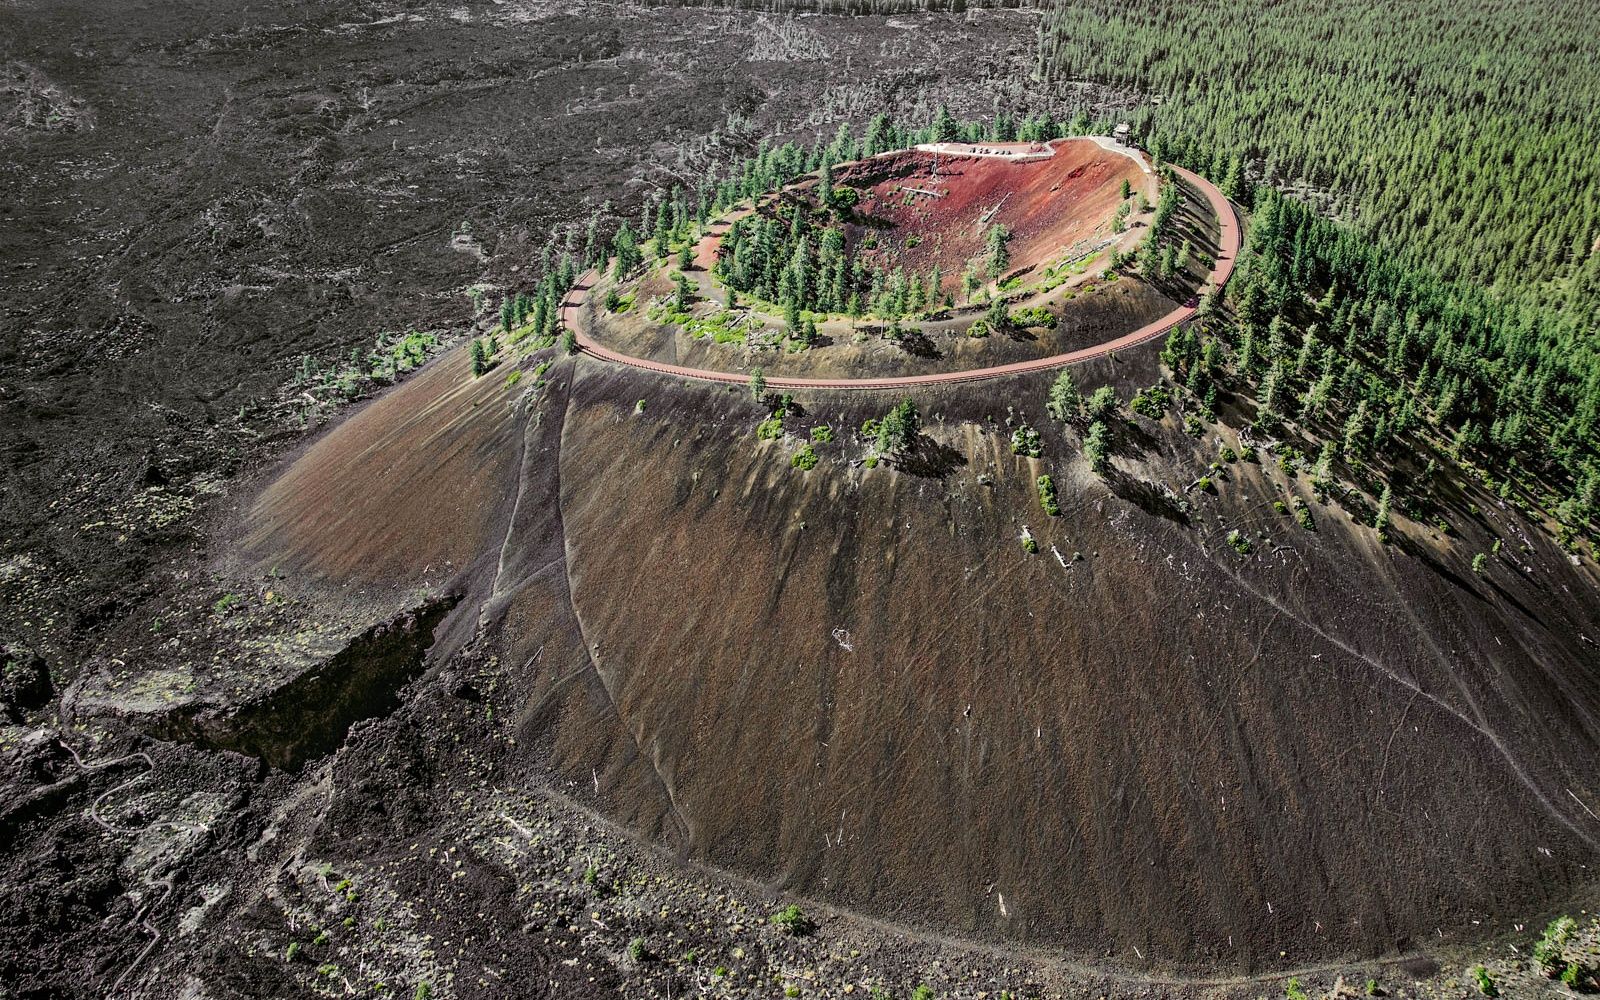 There is a 500 feet tall Cinder Cone Lave Butte in central Oregon between the towns of Bend Oregon and Sunrivr Oregon.